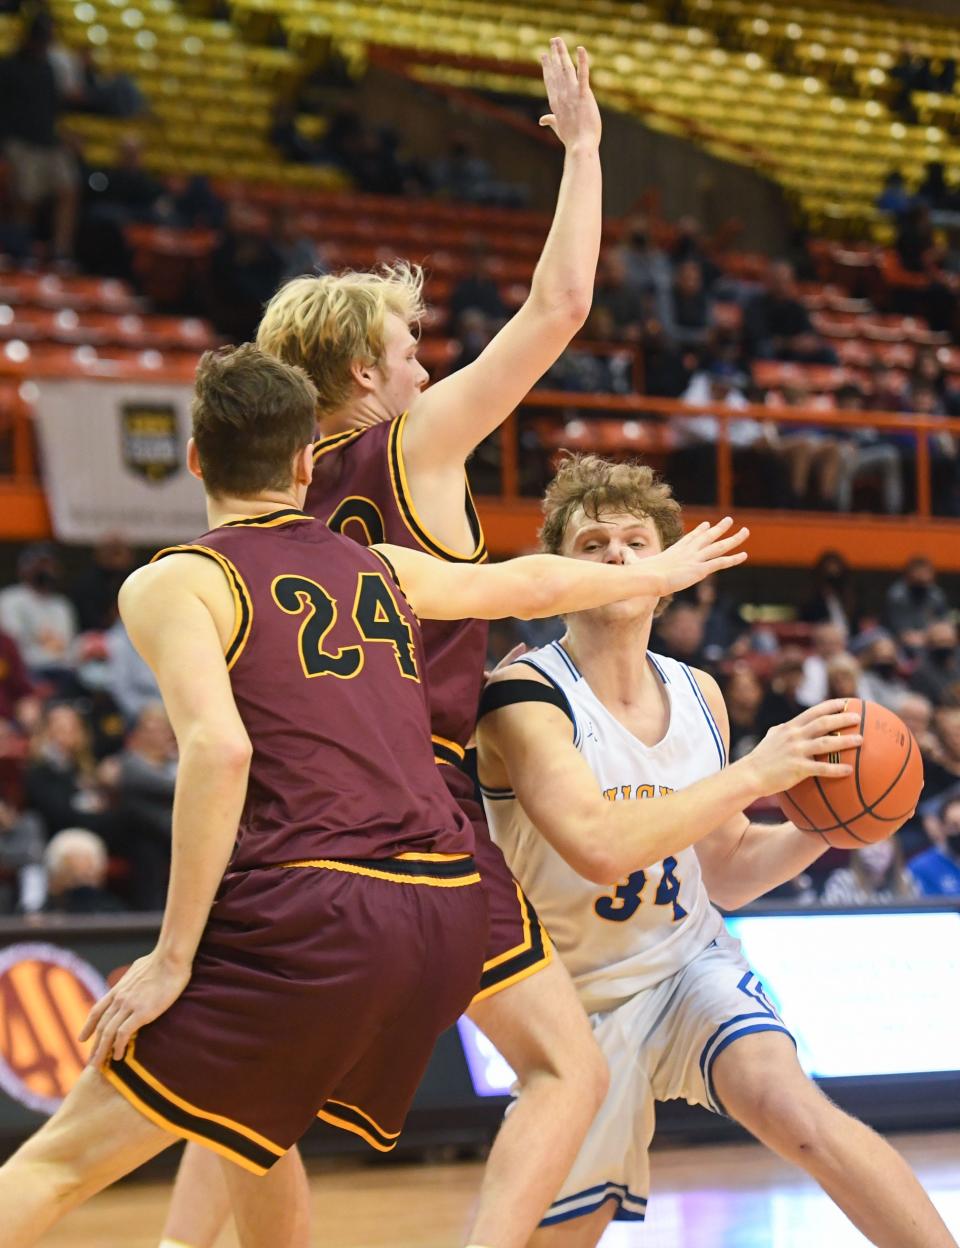 O'Gorman's David Alpers is blocked at face-level by Harrisburg's Jacoby Mehrman and Nick Tschudy during the quarterfinals of the boys class AA tournament on Thursday, March 18, 2021, at the Rushmore Plaza Civic Center in Rapid City.